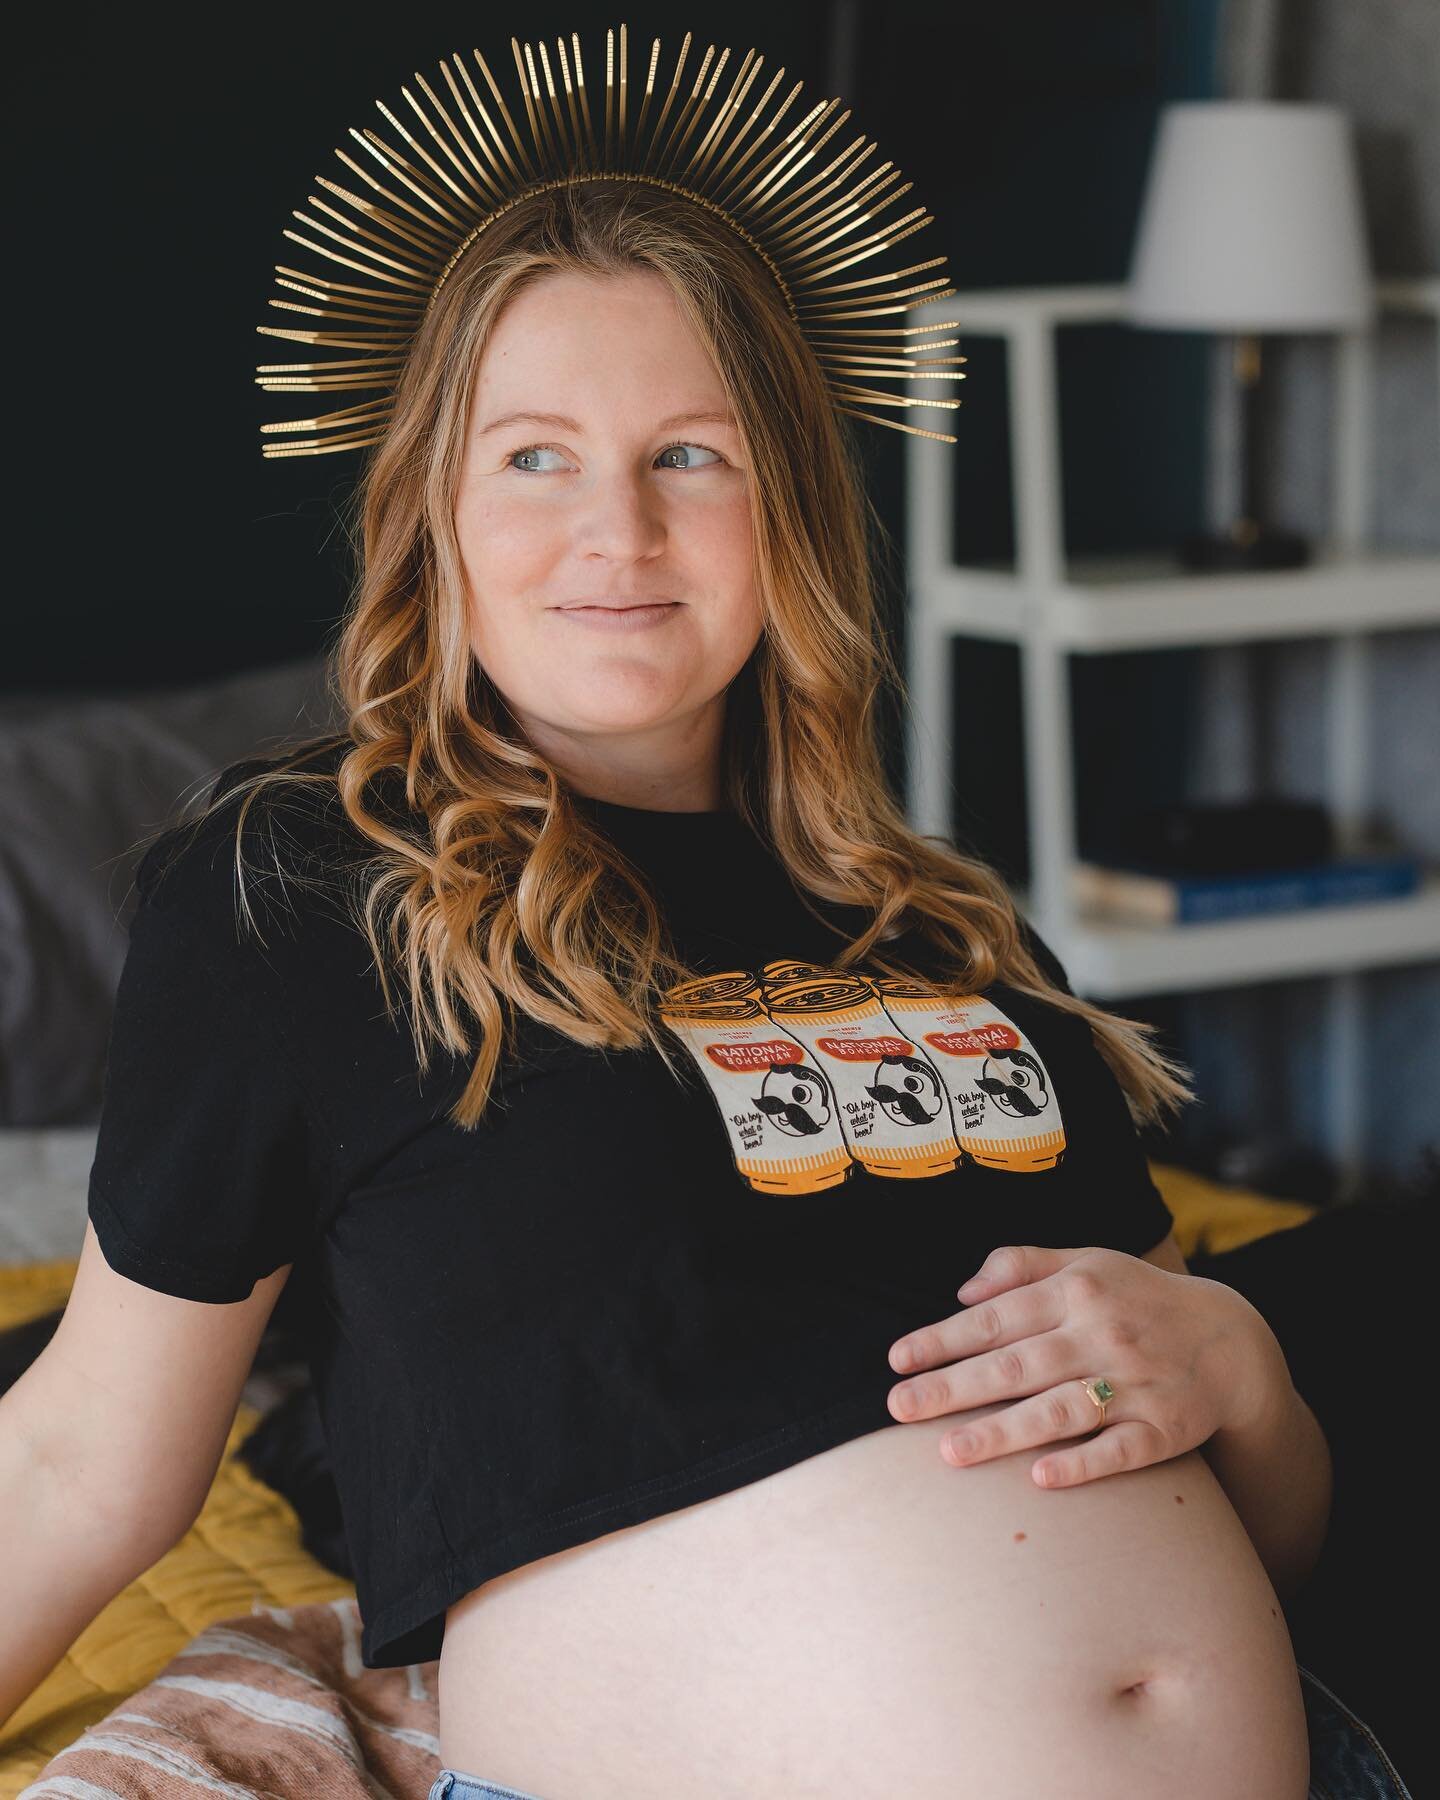 Maternity leave is officially here 🎉 Y&rsquo;all know I had to take at least one Baltimore-themed photo! 🧡

Thank you @rmbrandphotography for the amazing photos! Baby bump has grown since these photos were taken &hellip; 🤯

Swipe for baby&rsquo;s 